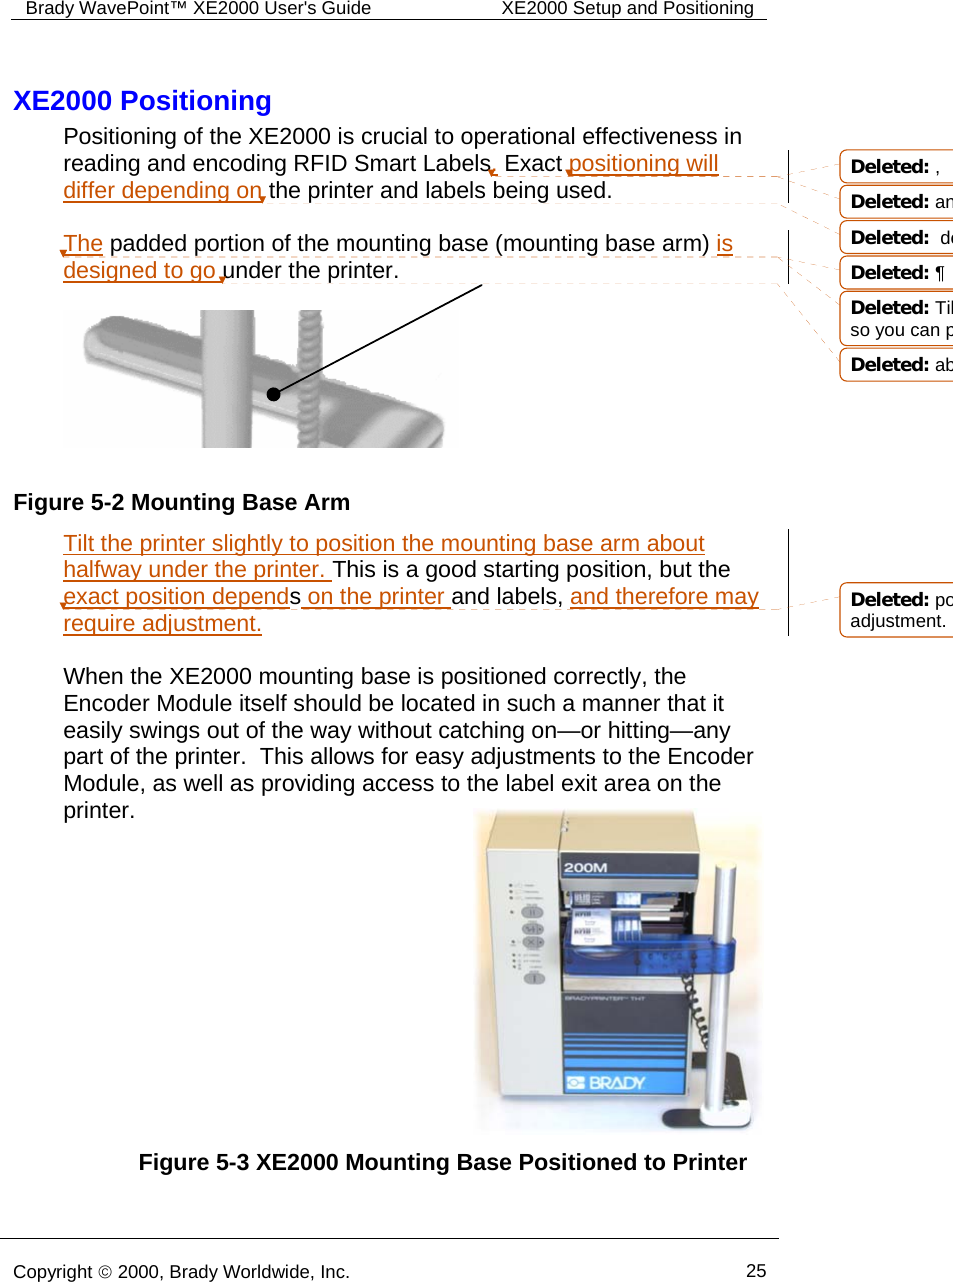 Brady WavePoint™ XE2000 User&apos;s Guide  XE2000 Setup and Positioning      Copyright © 2000, Brady Worldwide, Inc.  25  Figure 5-3 XE2000 Mounting Base Positioned to Printer XE2000 Positioning Positioning of the XE2000 is crucial to operational effectiveness in reading and encoding RFID Smart Labels. Exact positioning will differ depending on the printer and labels being used.    The padded portion of the mounting base (mounting base arm) is designed to go under the printer.     Tilt the printer slightly to position the mounting base arm about halfway under the printer. This is a good starting position, but the exact position depends on the printer and labels, and therefore may require adjustment.  When the XE2000 mounting base is positioned correctly, the Encoder Module itself should be located in such a manner that it easily swings out of the way without catching on—or hitting—any part of the printer.  This allows for easy adjustments to the Encoder Module, as well as providing access to the label exit area on the printer.         Figure 5-2 Mounting Base ArmDeleted: ,Deleted: anDeleted:  deDeleted: ¶Deleted: Tilso you can pDeleted: abDeleted: poadjustment.